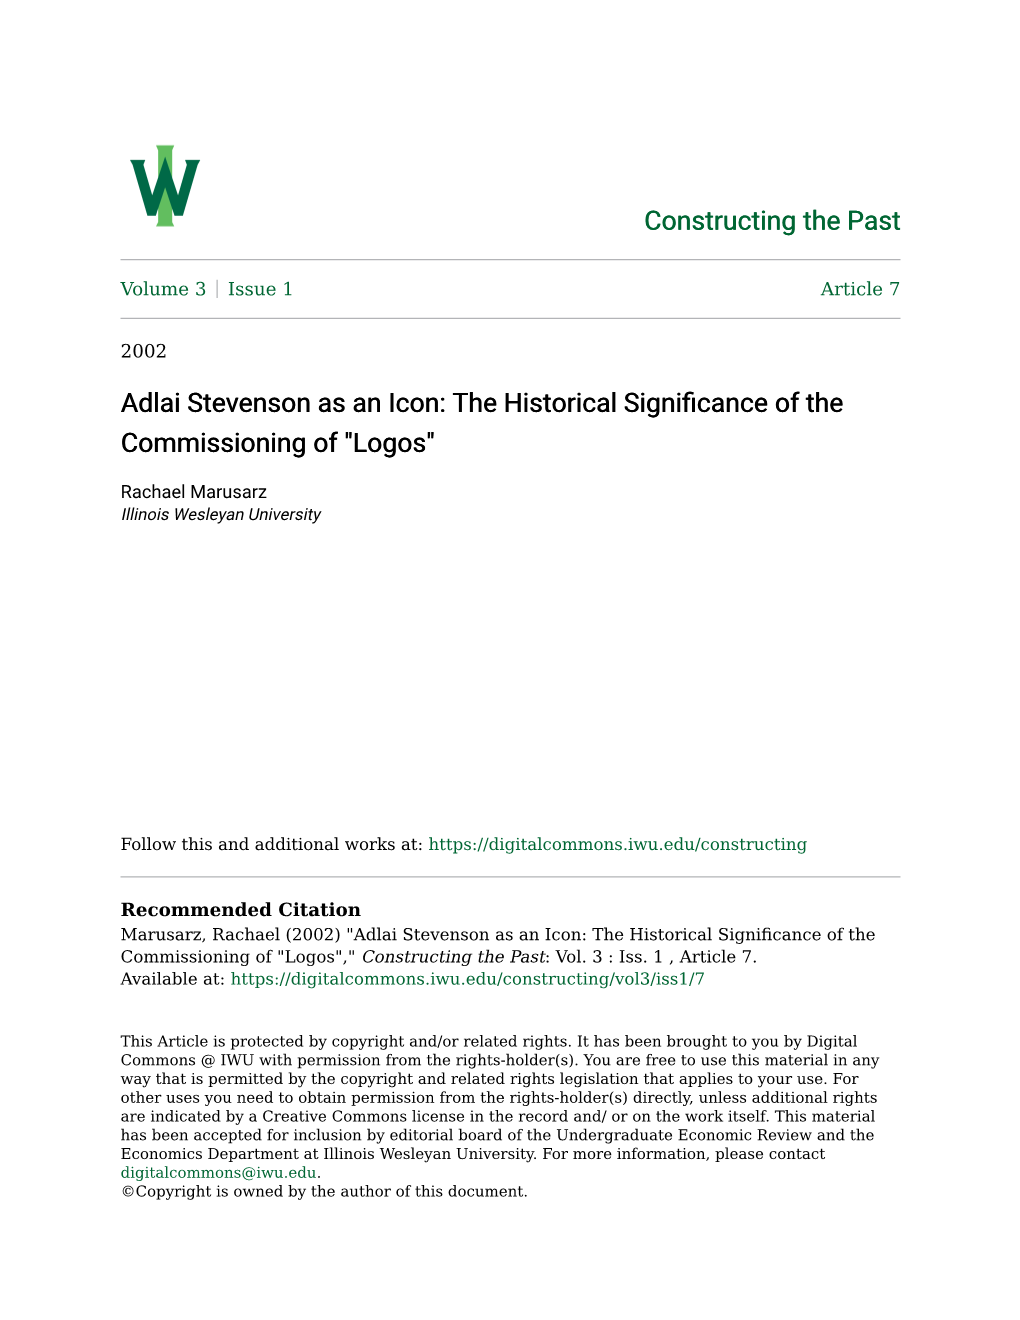 Adlai Stevenson As an Icon: the Historical Significance of the Commissioning of "Logos"